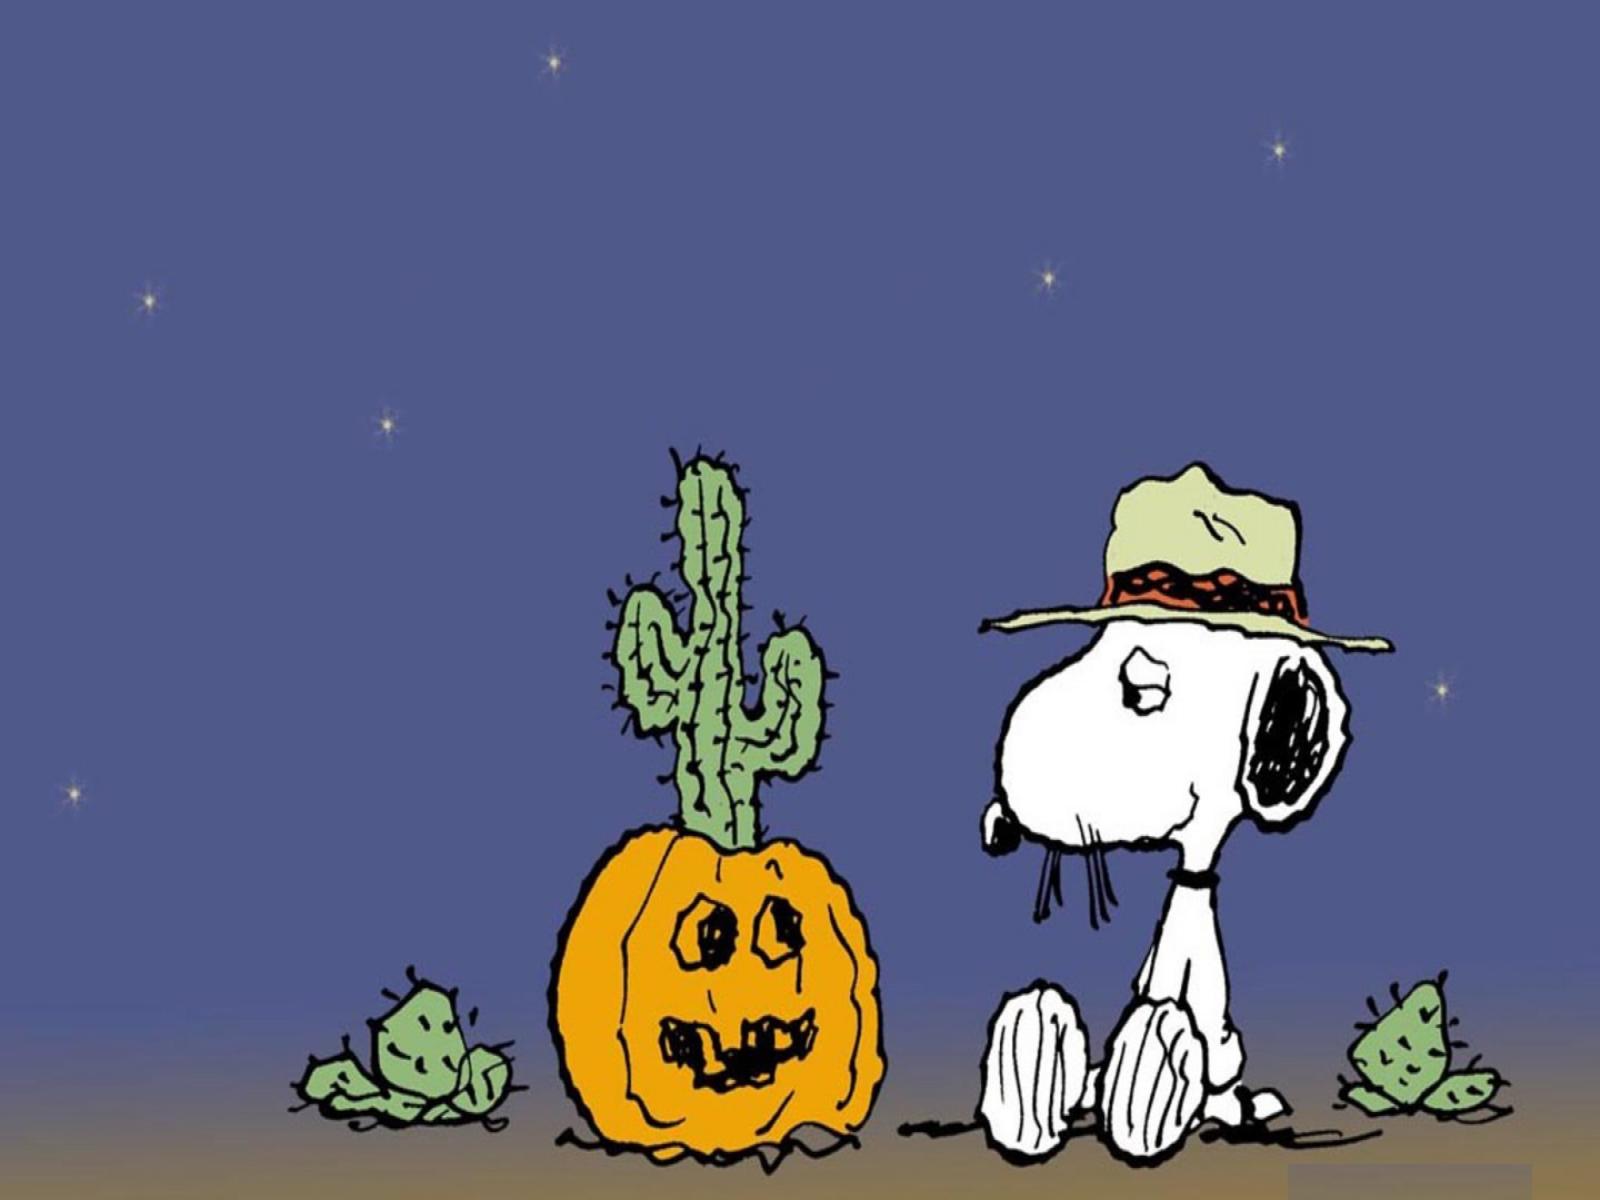 Snoopy and person in a halloween scene - Snoopy, Charlie Brown, Halloween desktop